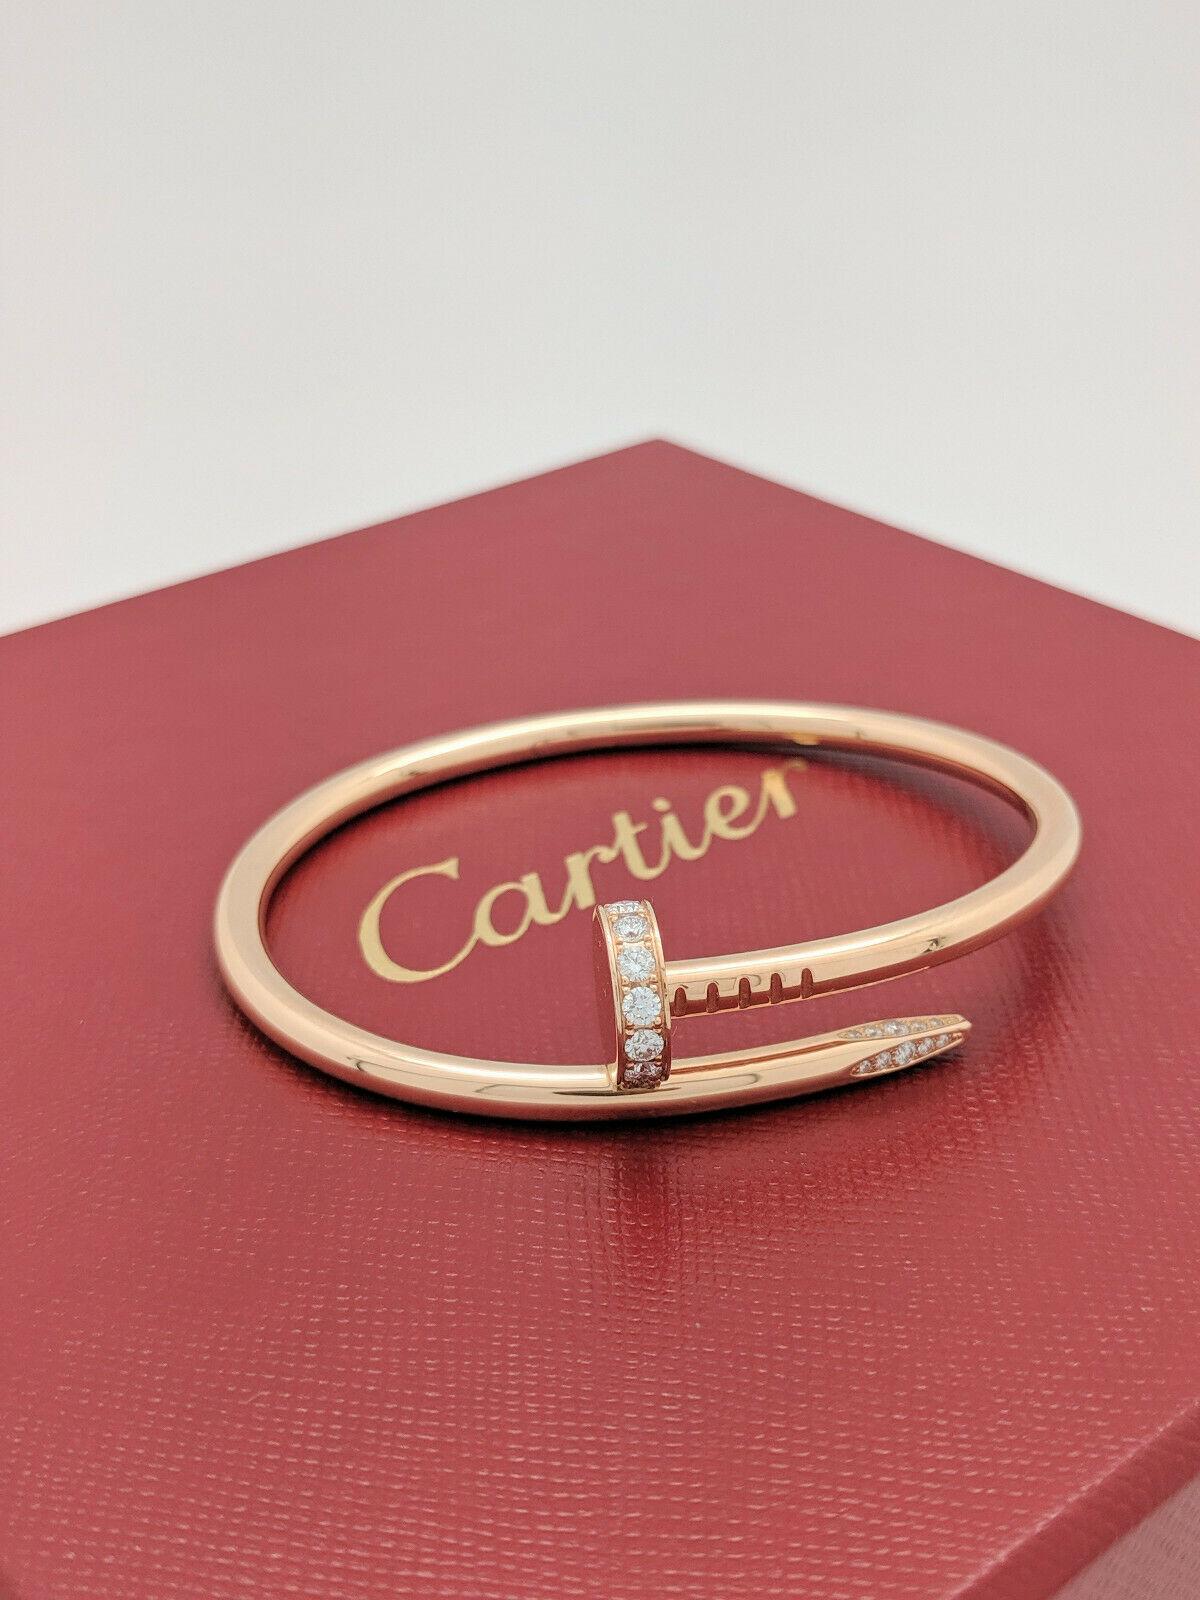 how to open cartier nail bracelet